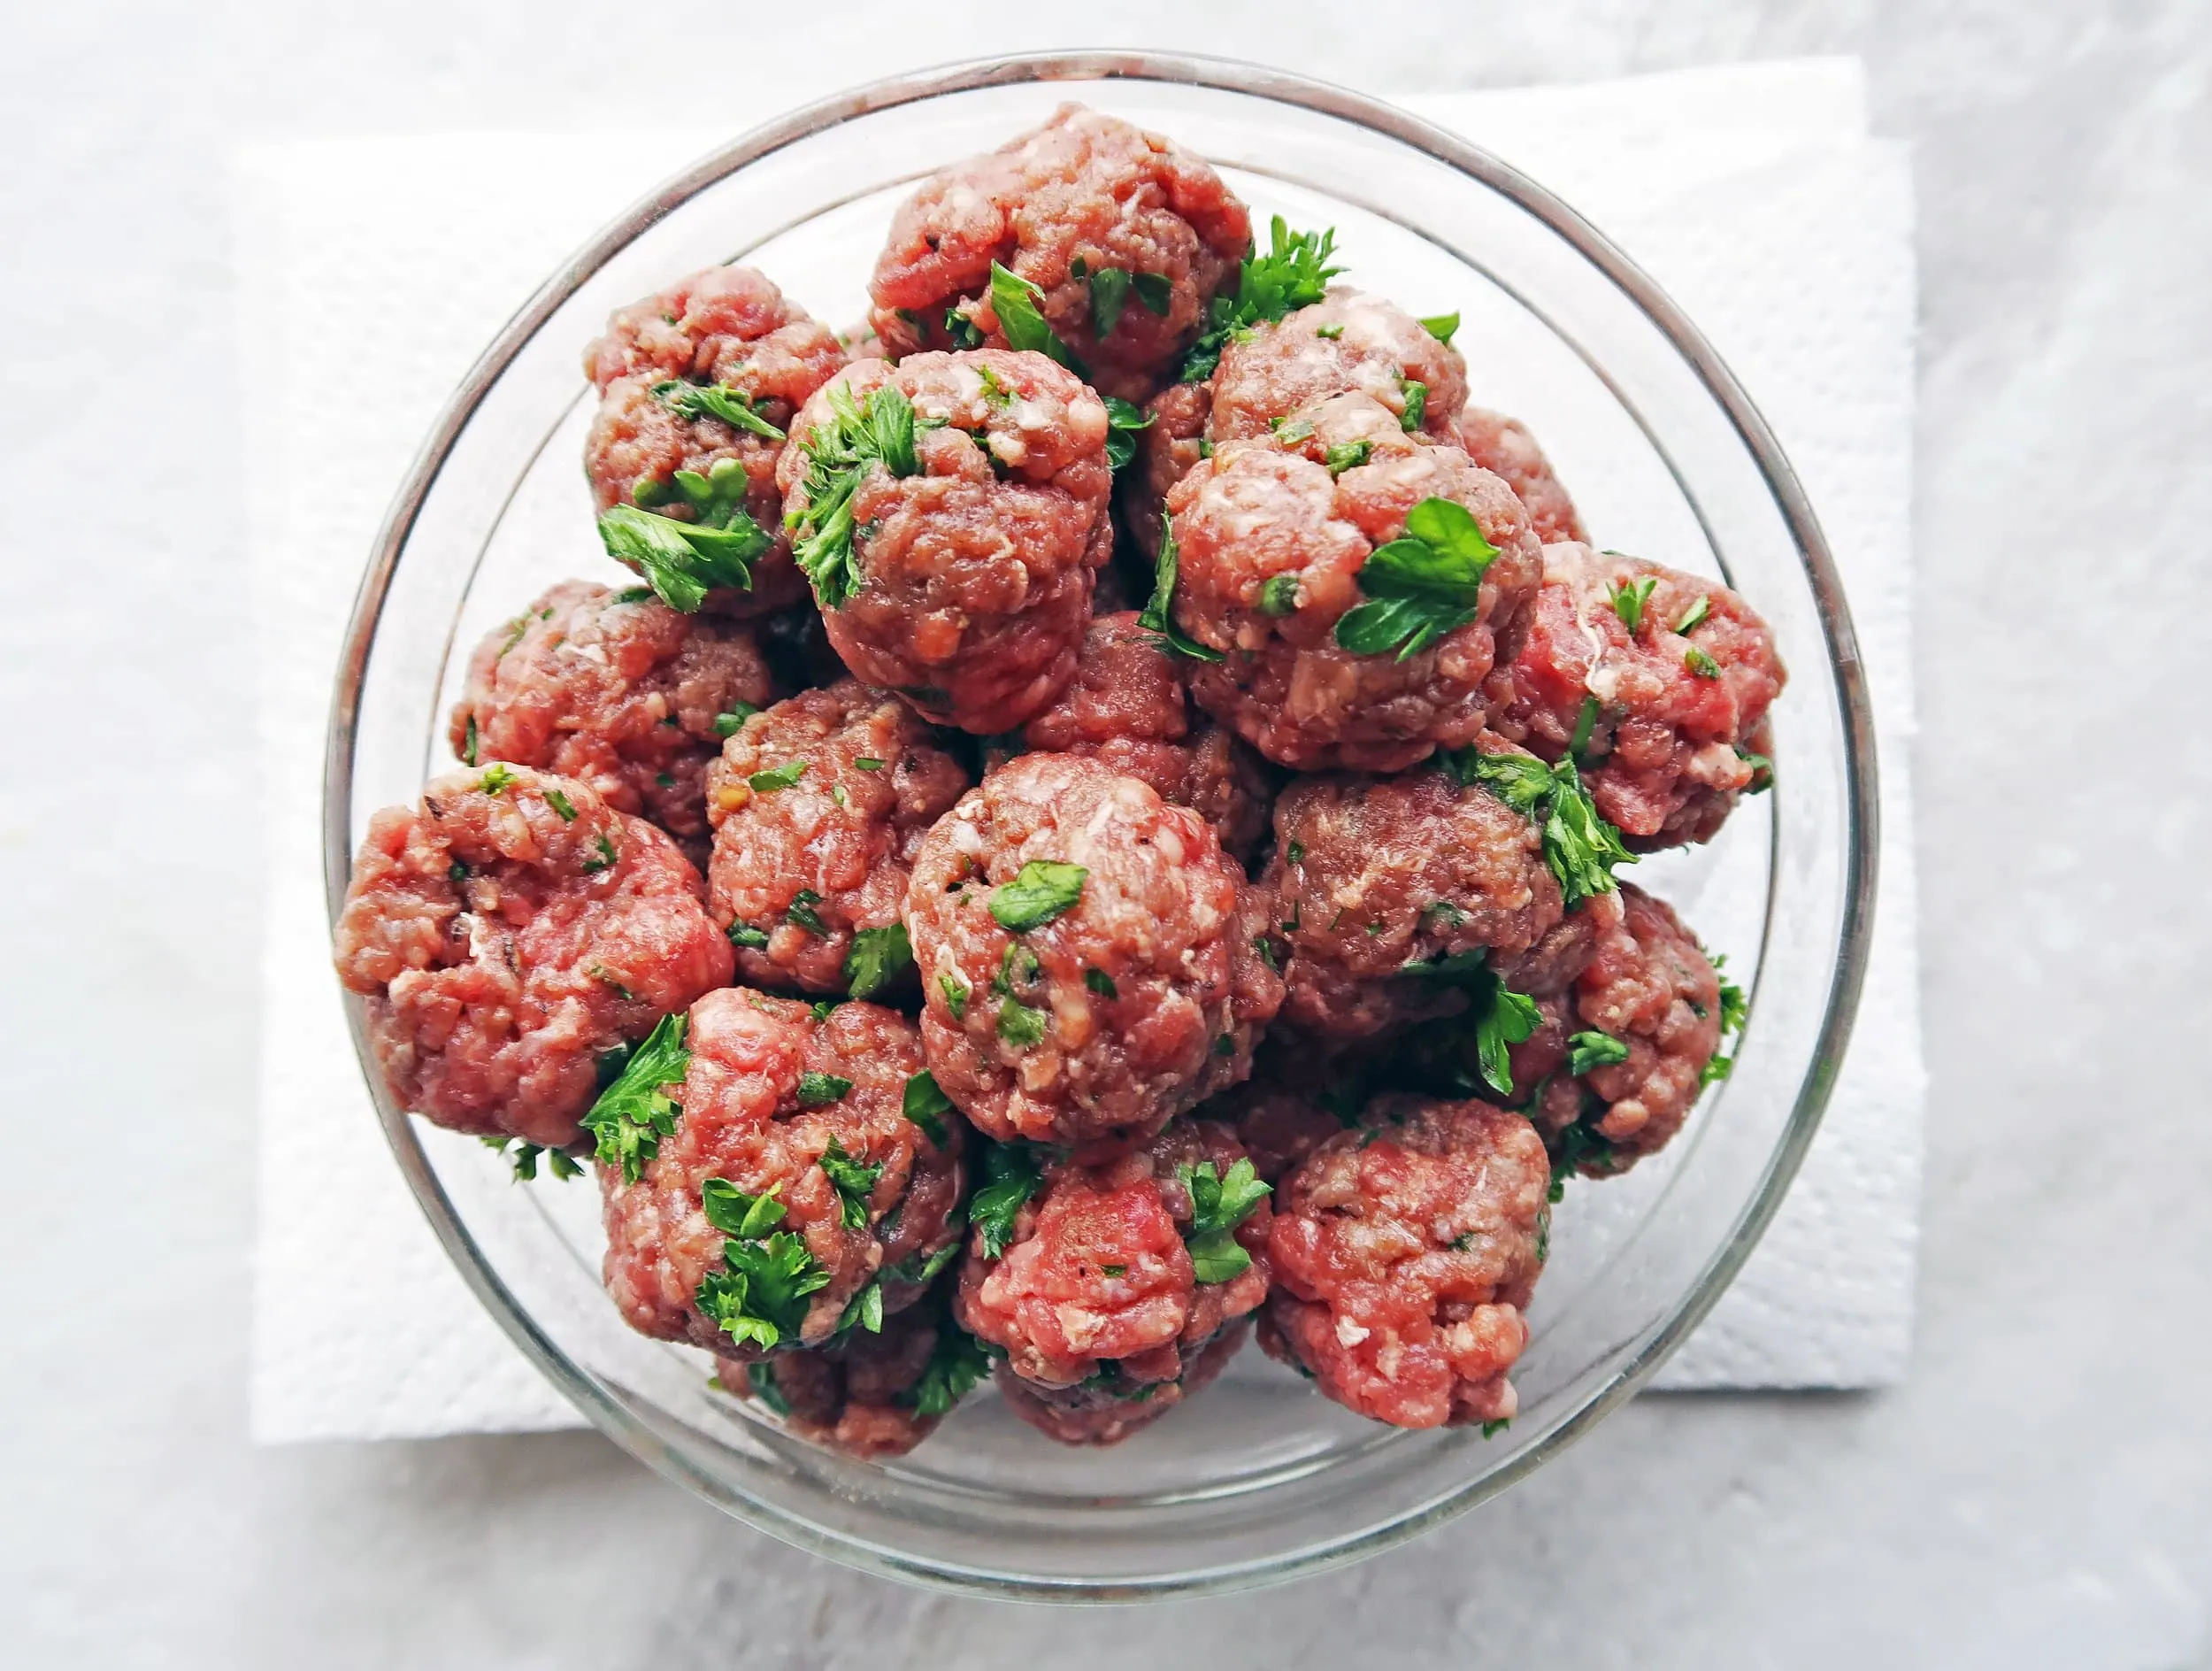 A bowl of beef meatballs.